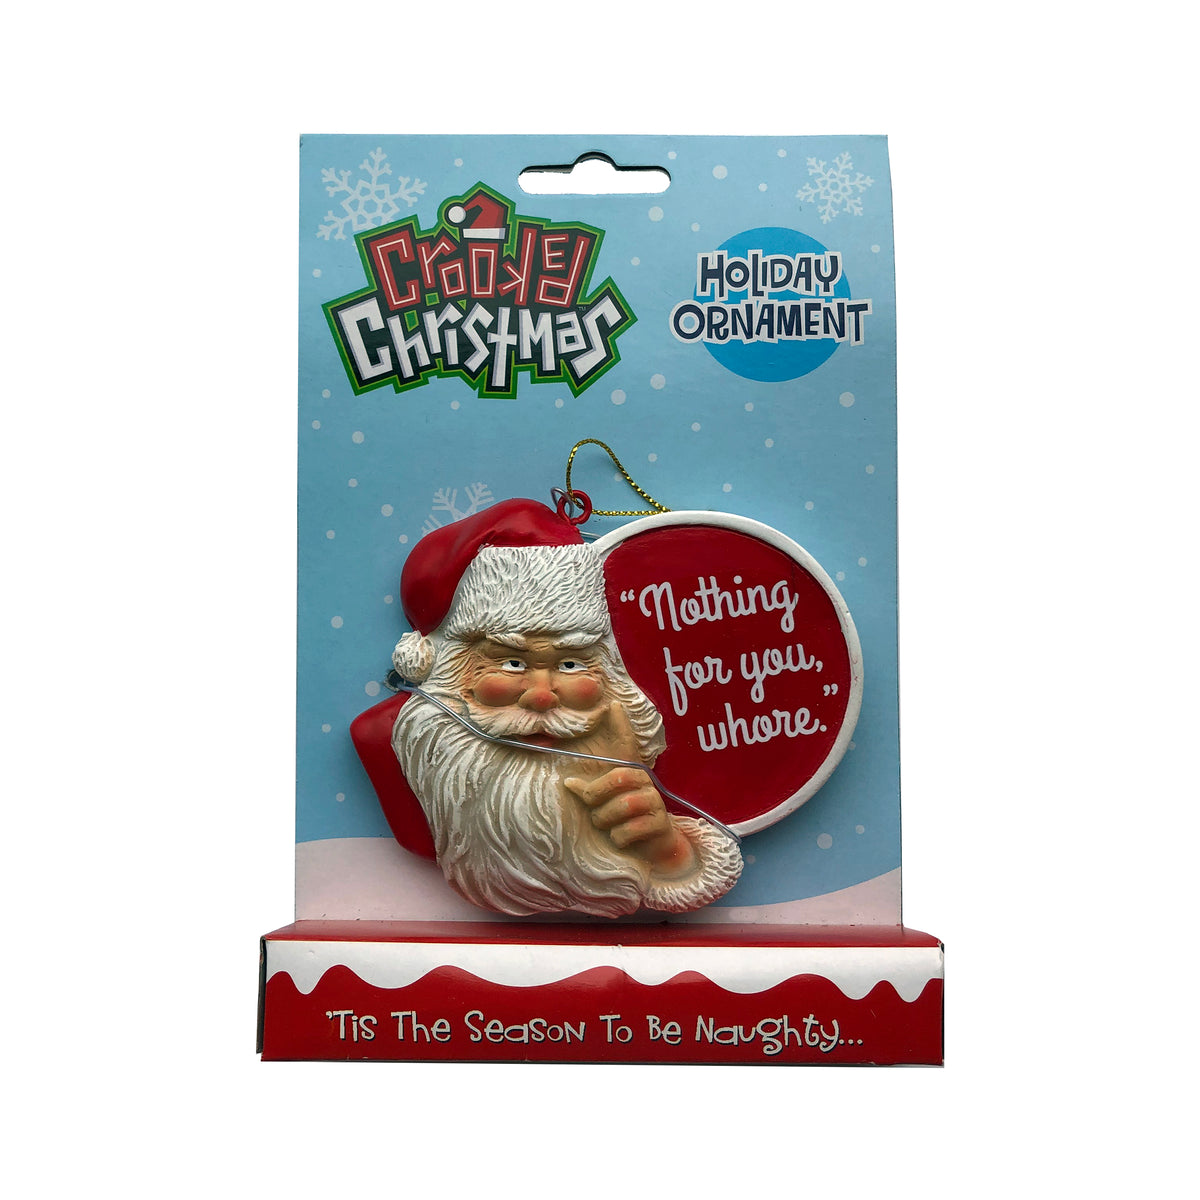 Nothing For You Crooked Christmas Ornament